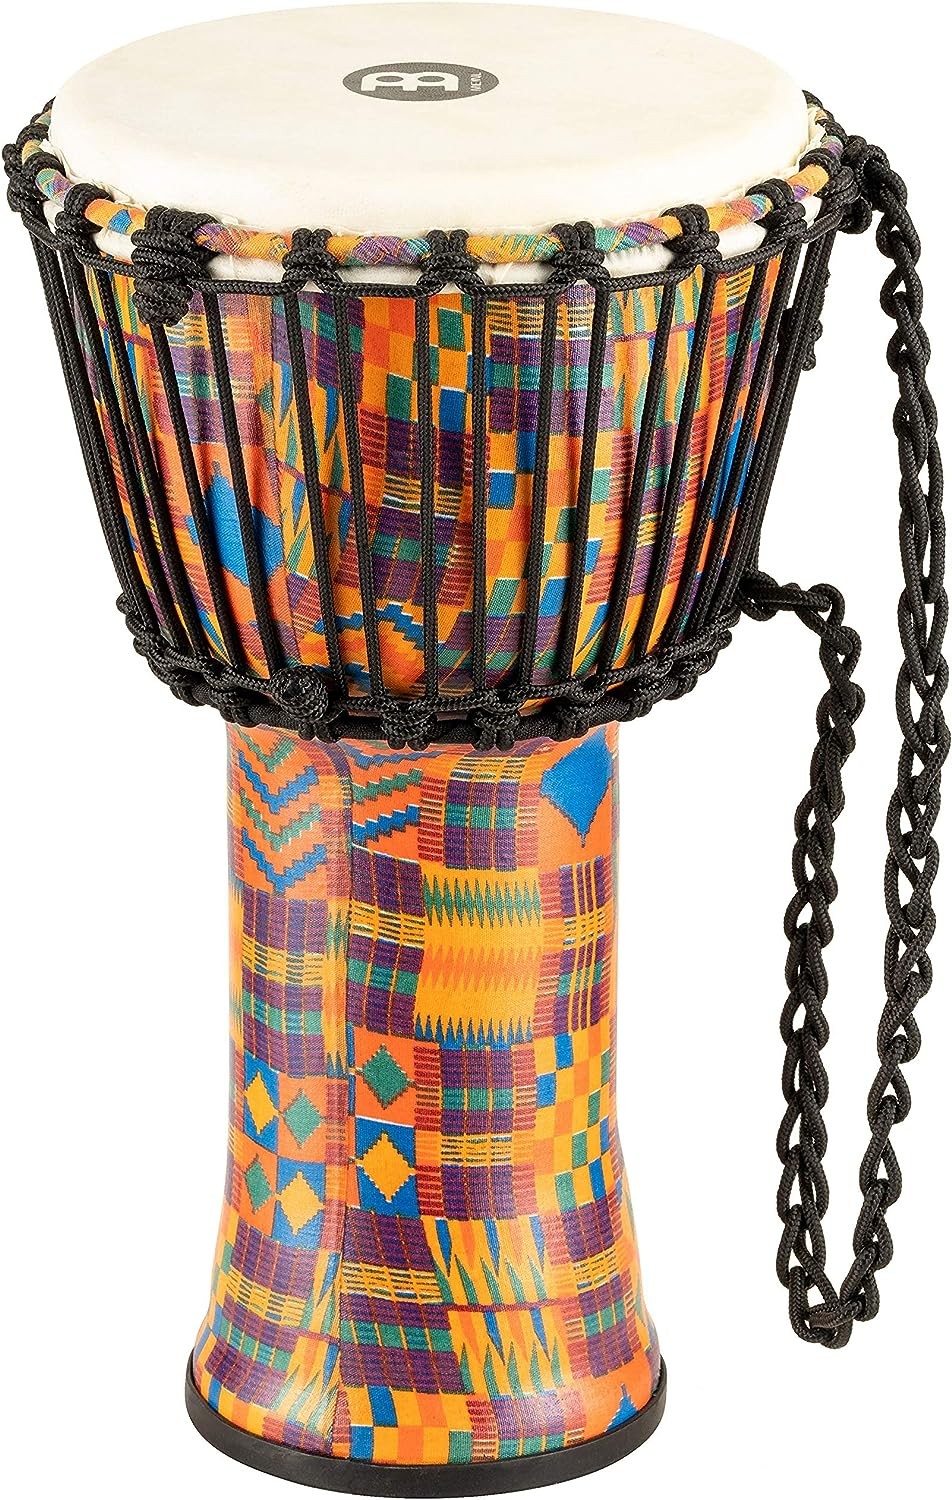 Meinl Percussion Rope Tuned Travel Series Djembe, 10-inch, Goat Head, Kenyan Quilt